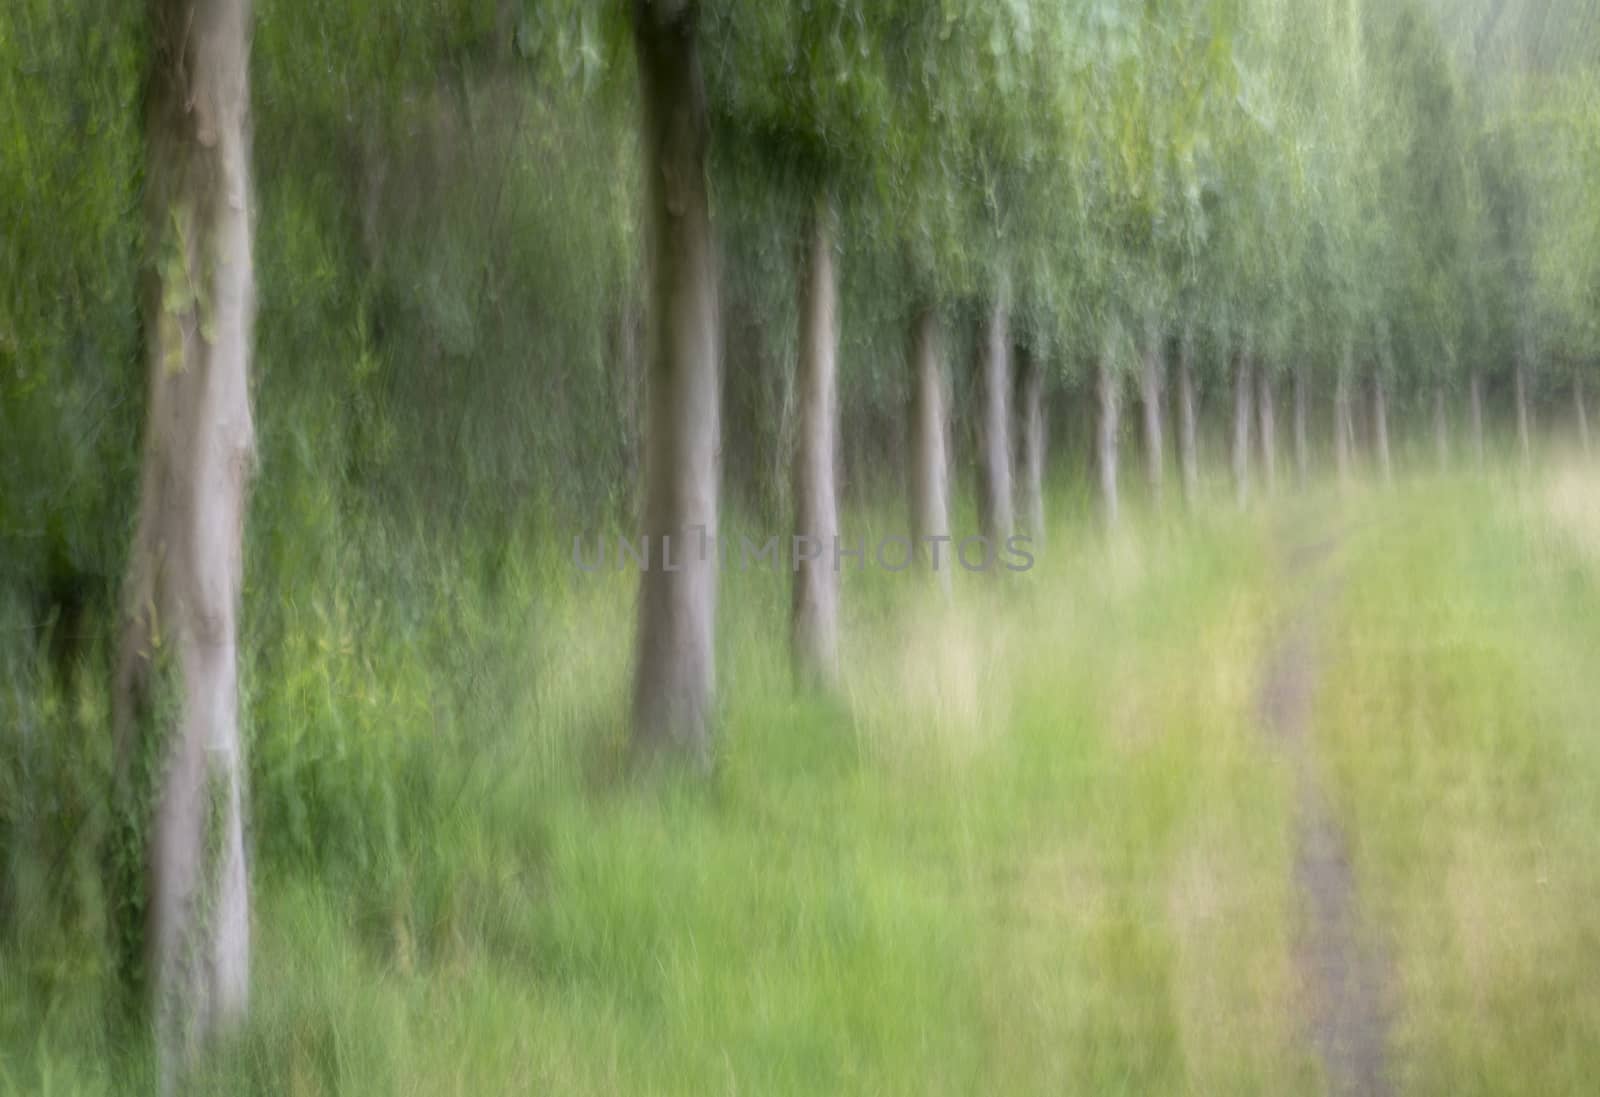 Abstract trees in a forest photographed with subtle movement so picturesque effect
